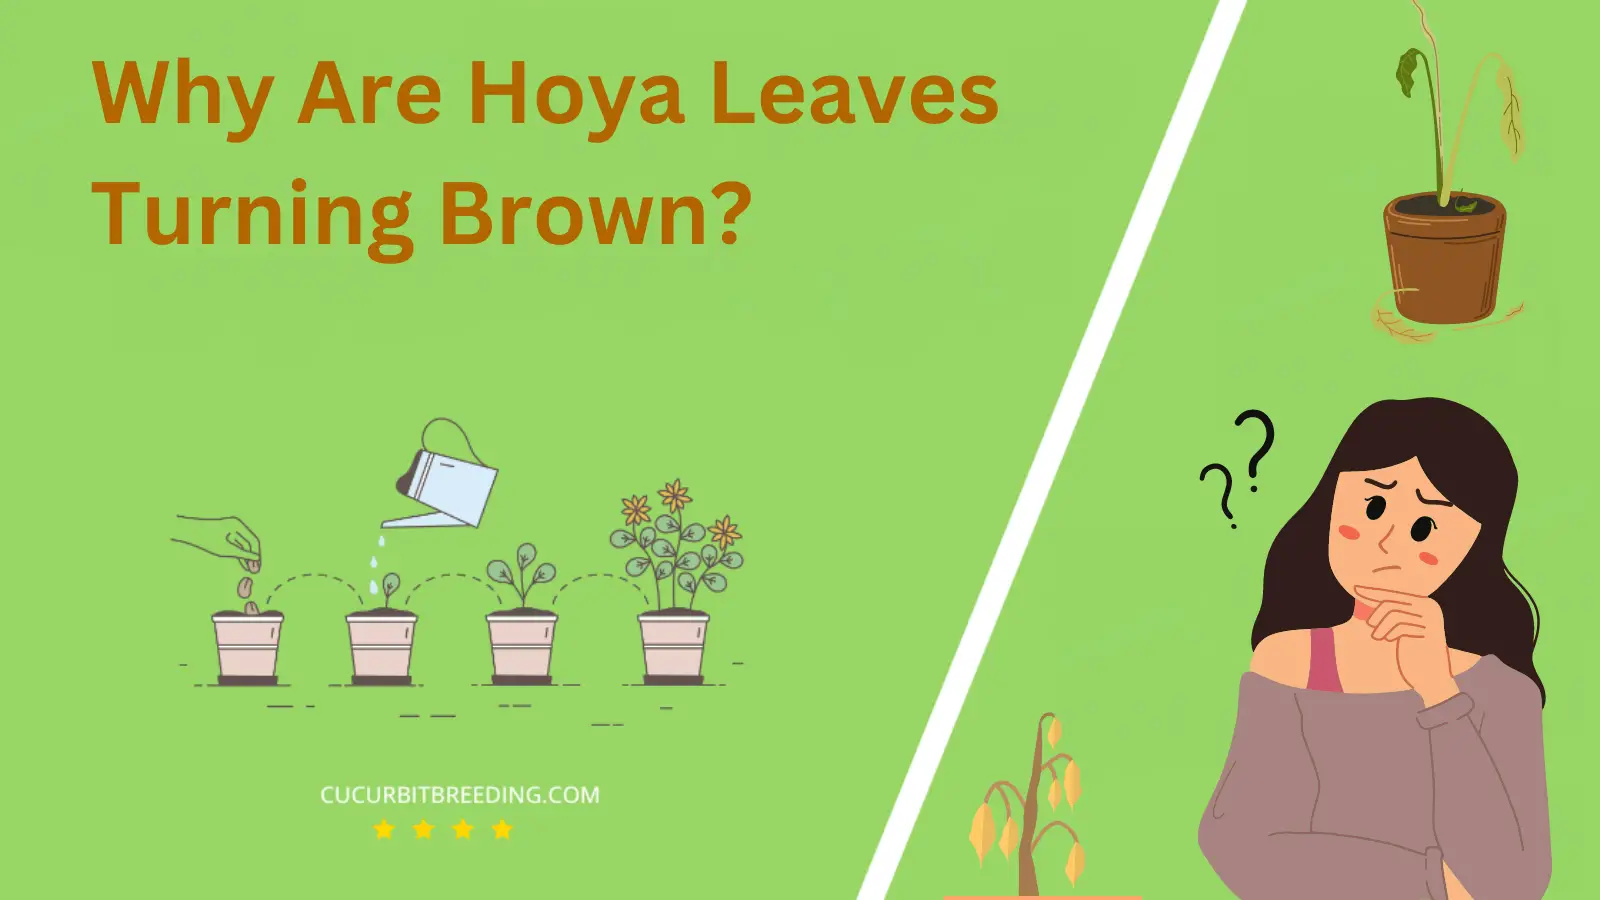 Why Are Hoya Leaves Turning Brown